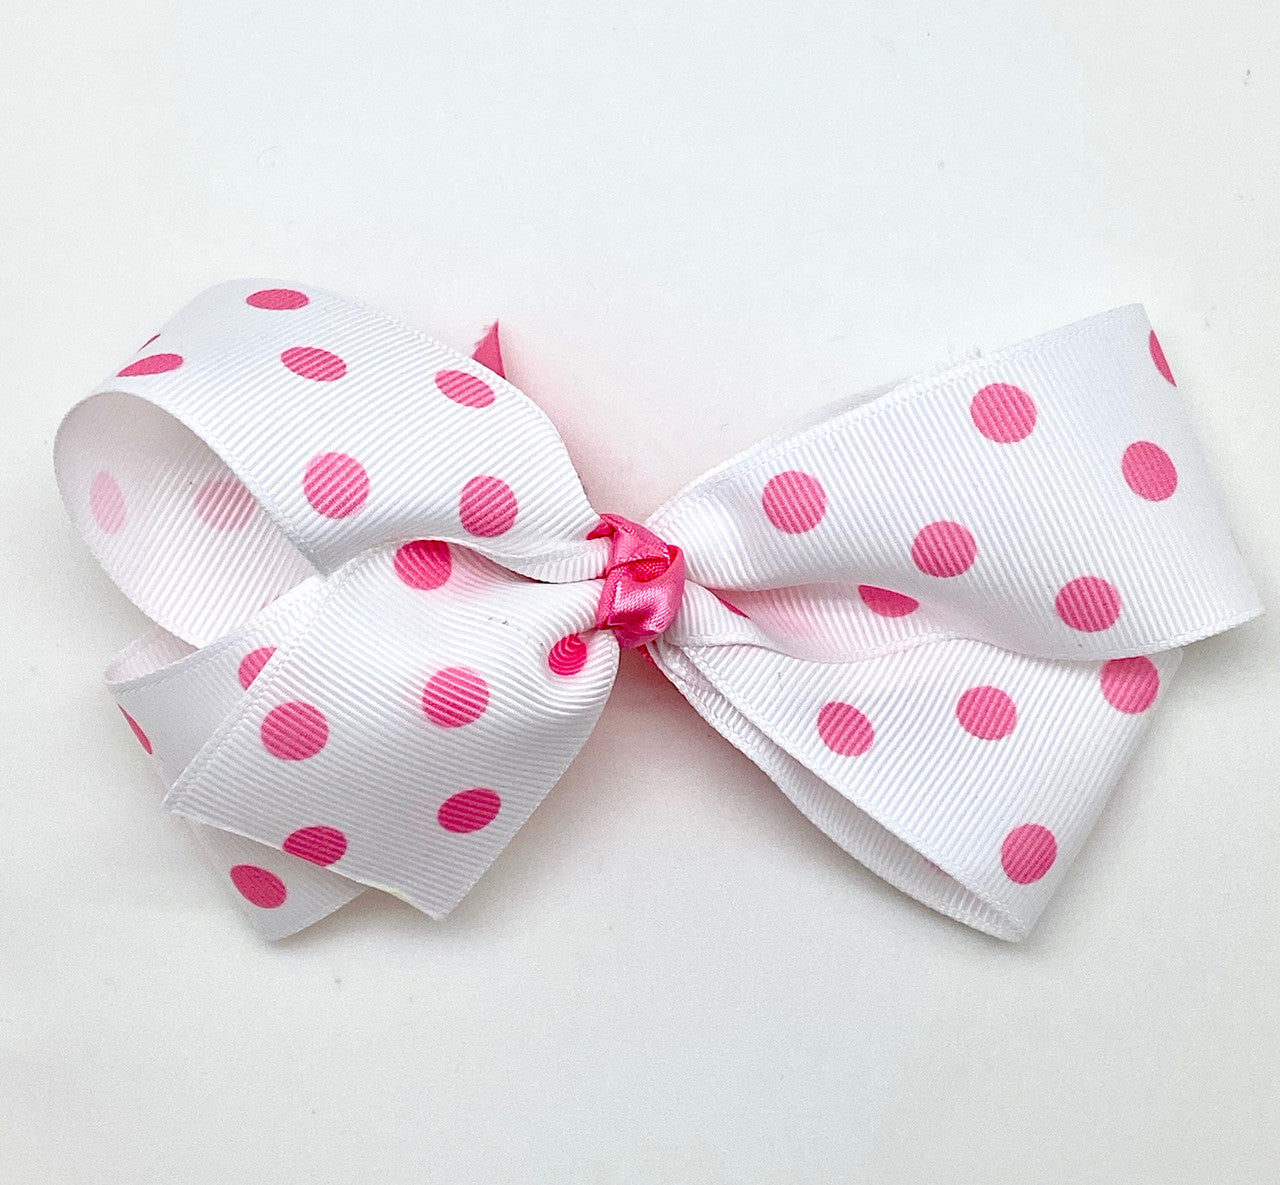 Our pink polka dots on 1.5" white grosgrain makes the cutest little hair bows! The sweetest design for every little girl!